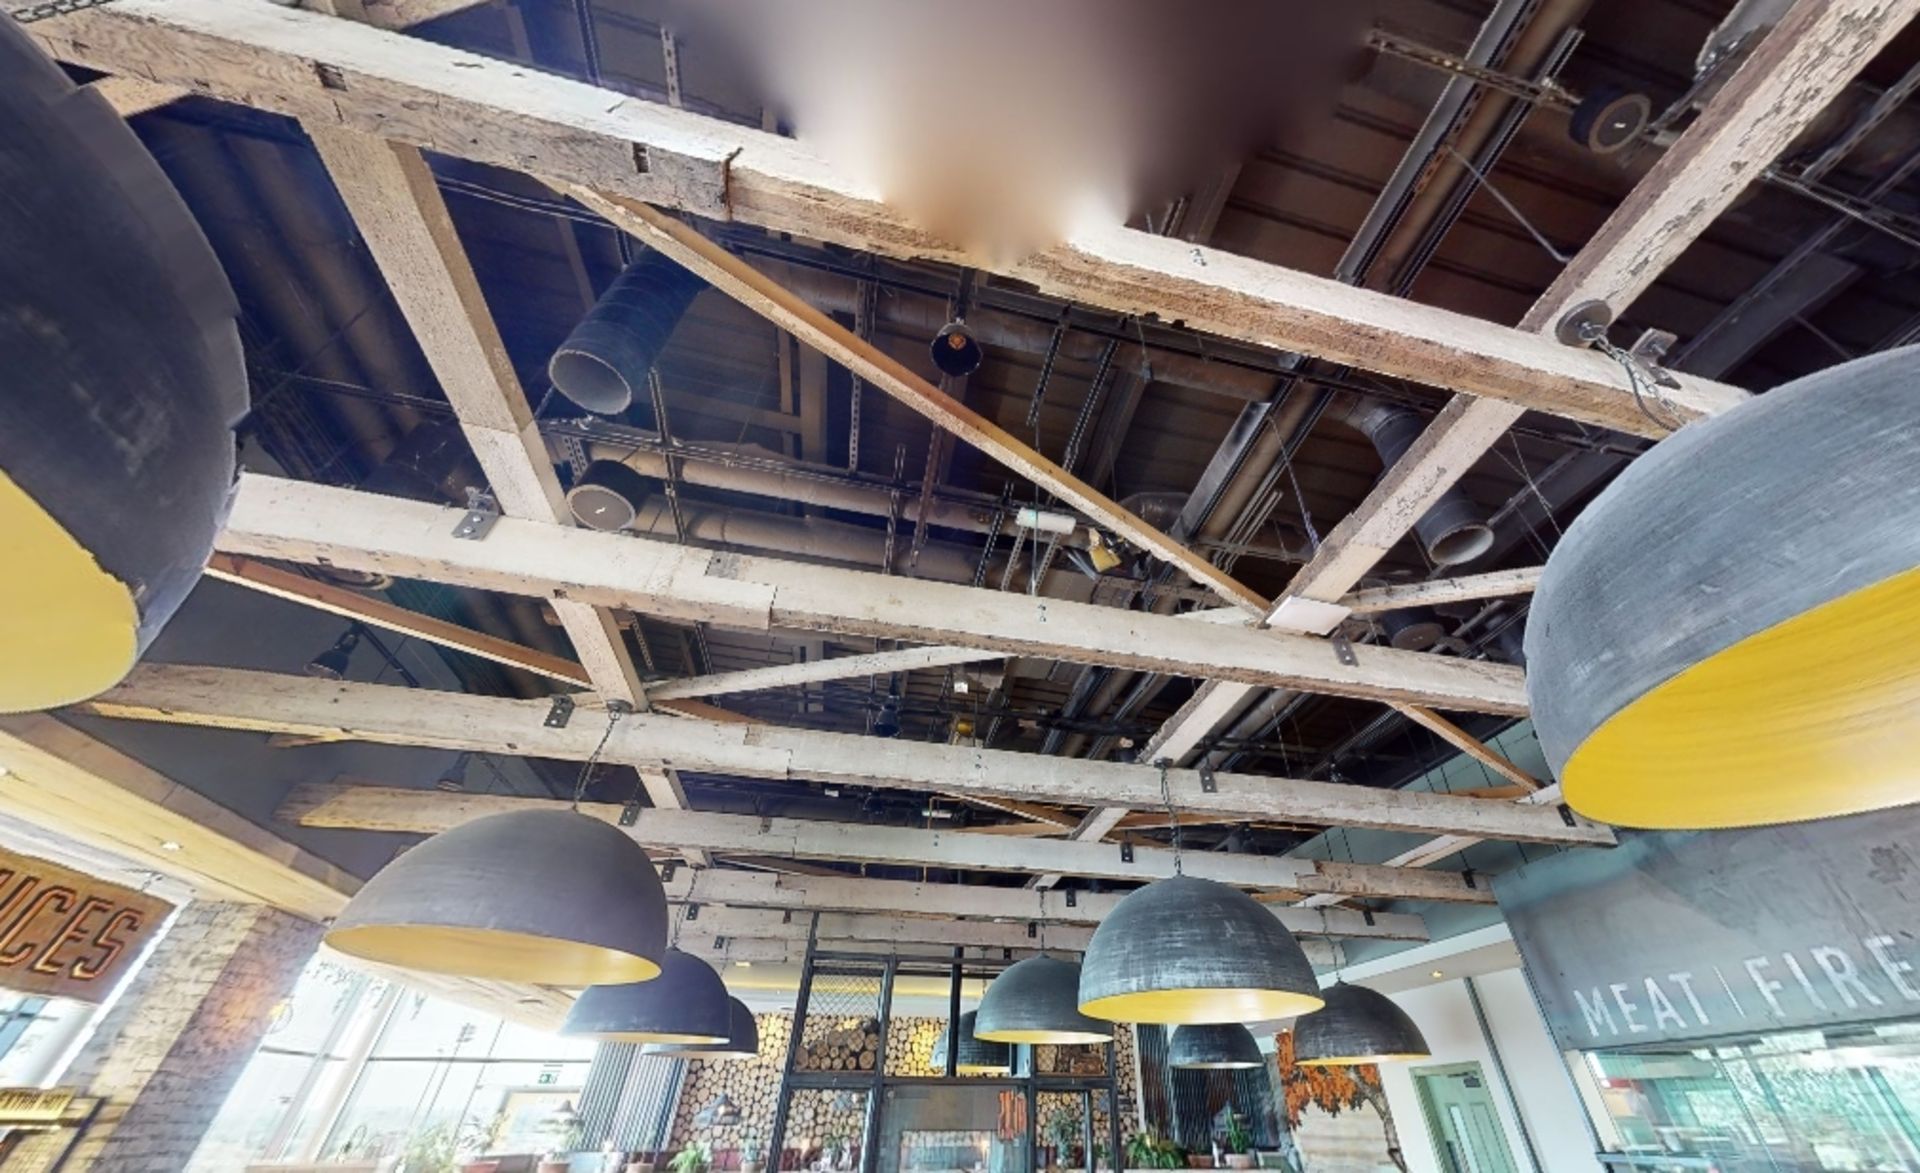 9 x Suspended Wooden Ceiling Beams With Fixing Beams - Rustic Farmhouse Style - 23 Feet in Length - Image 2 of 6